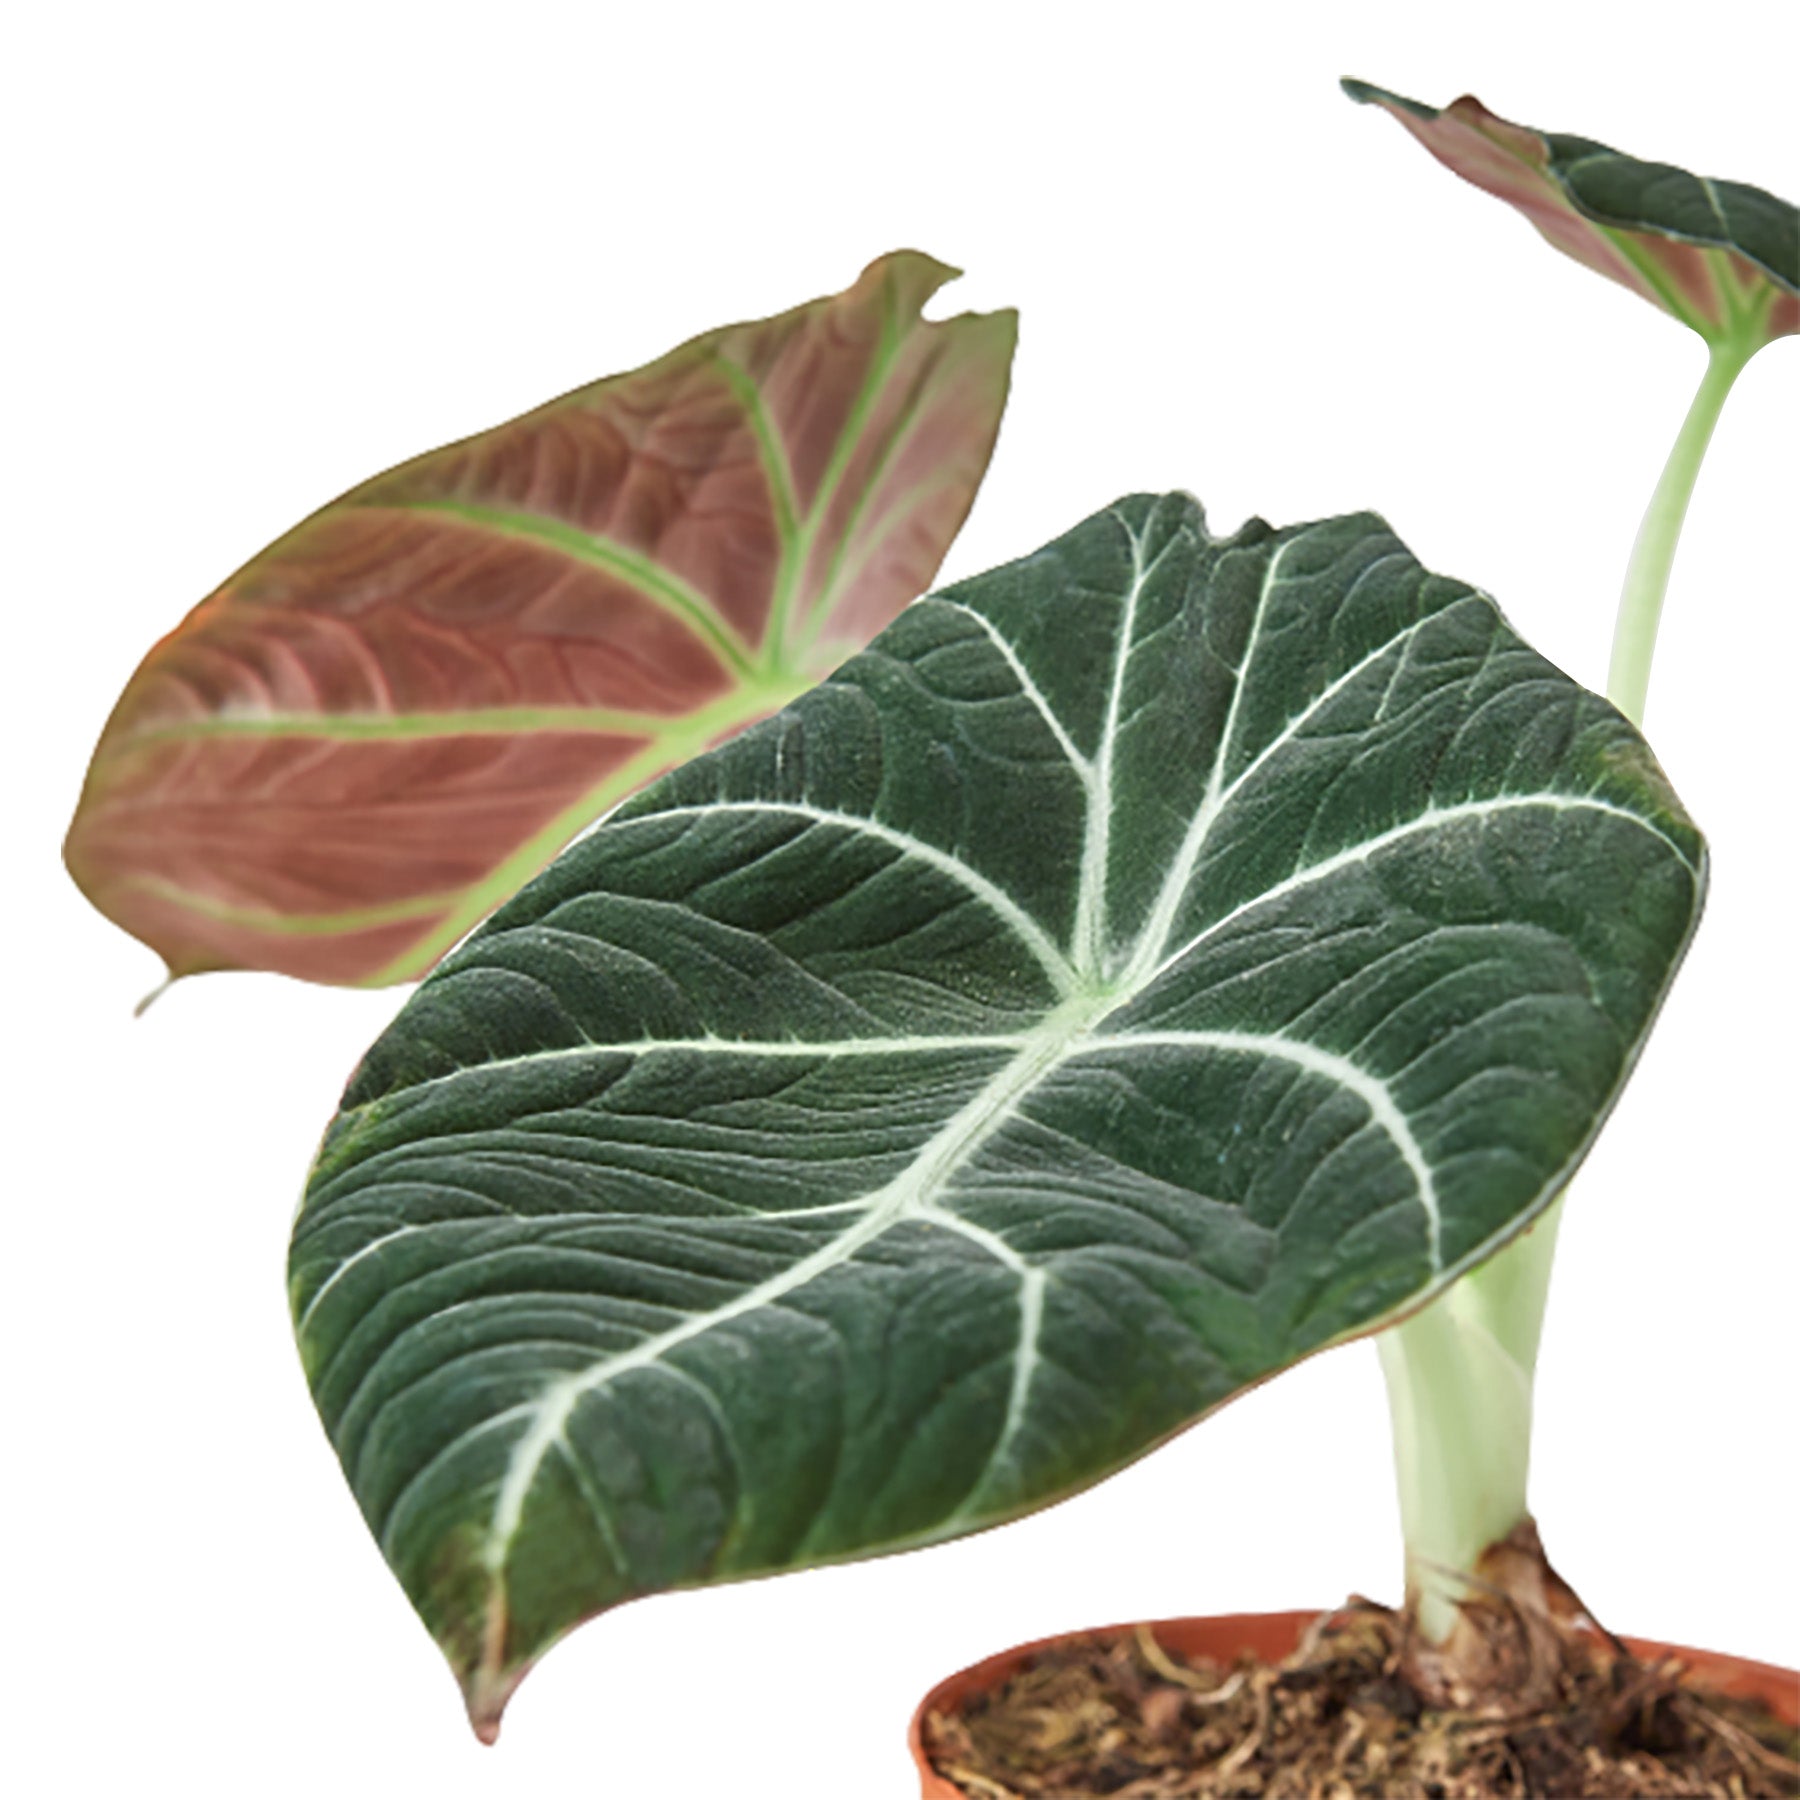 How to Plant, Grow, and Care for Alocasia Black Velvet - Full Guide